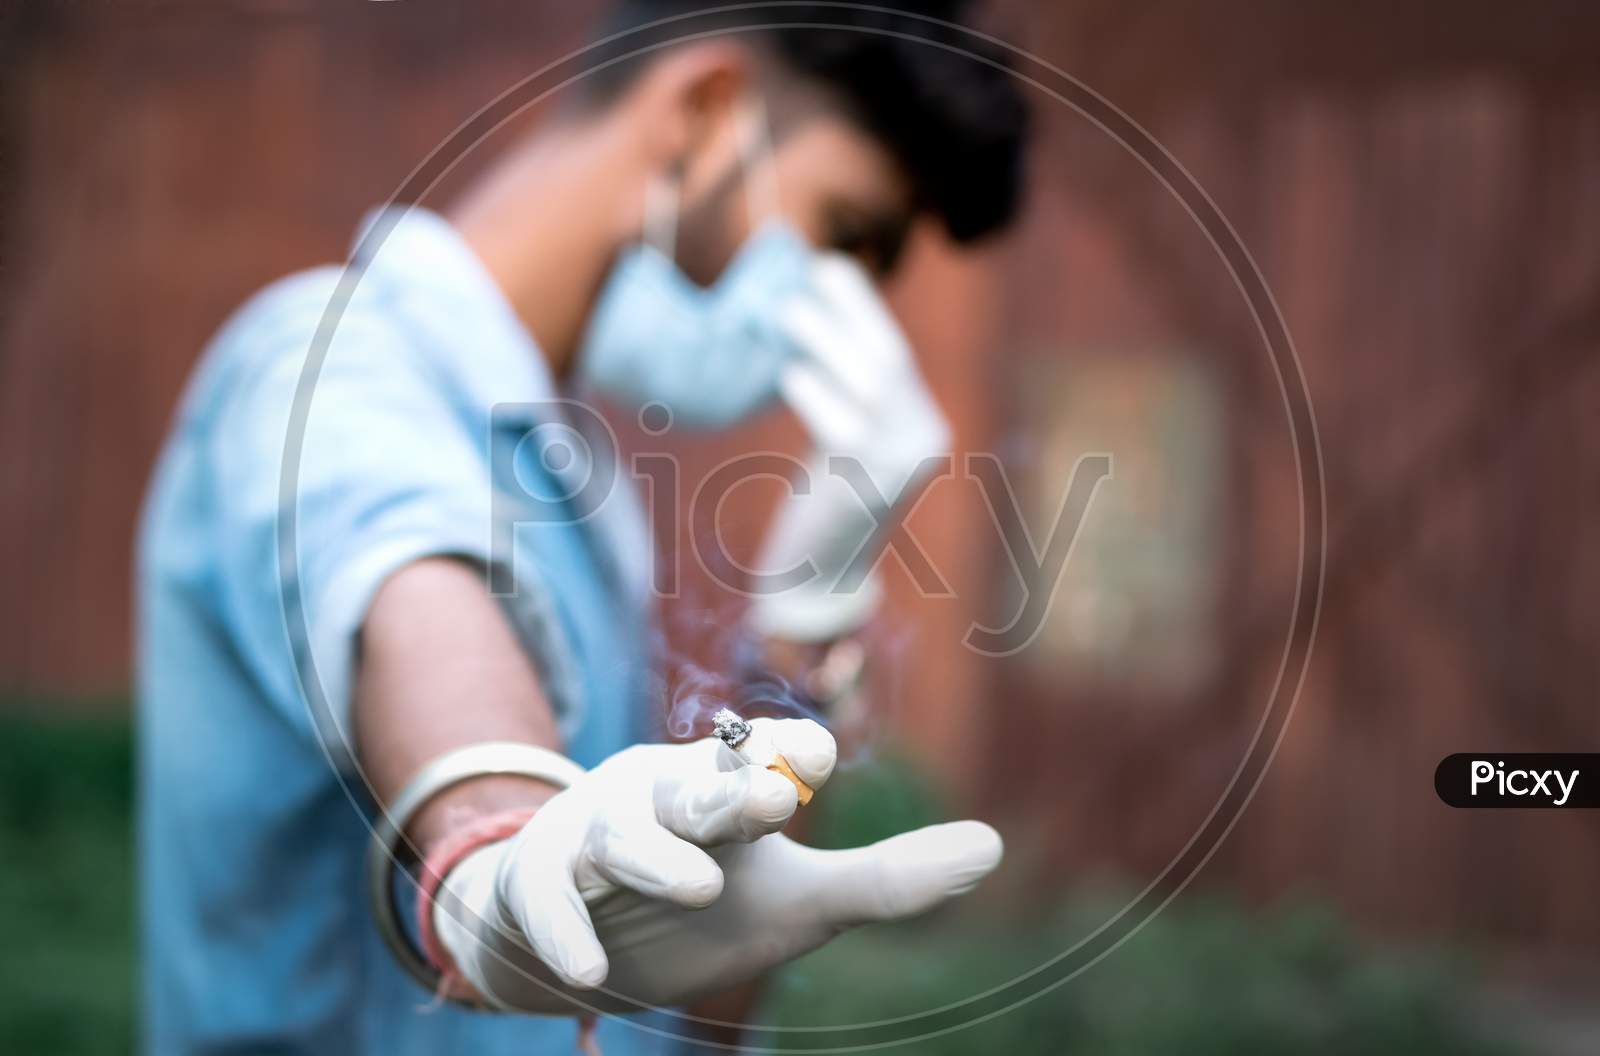 Man Holding Cigarette On His Hand And Feeling Guilty In Pandemic Situation.